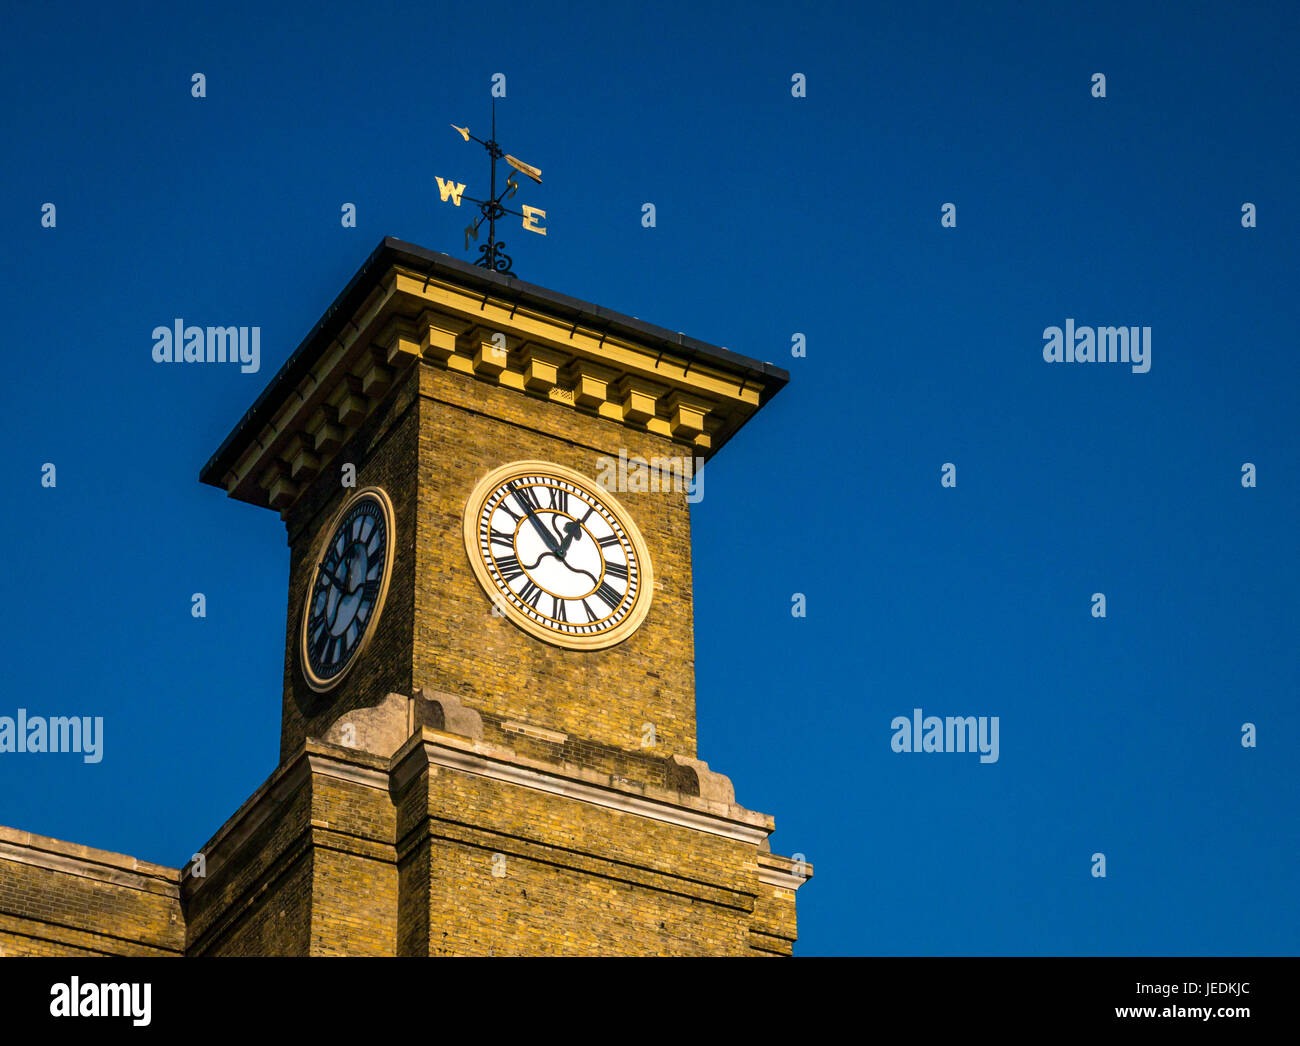 Close up view of clock face and weathervane, Victorian tower of King's Cross Railway station London, England, UK with blue sky Stock Photo